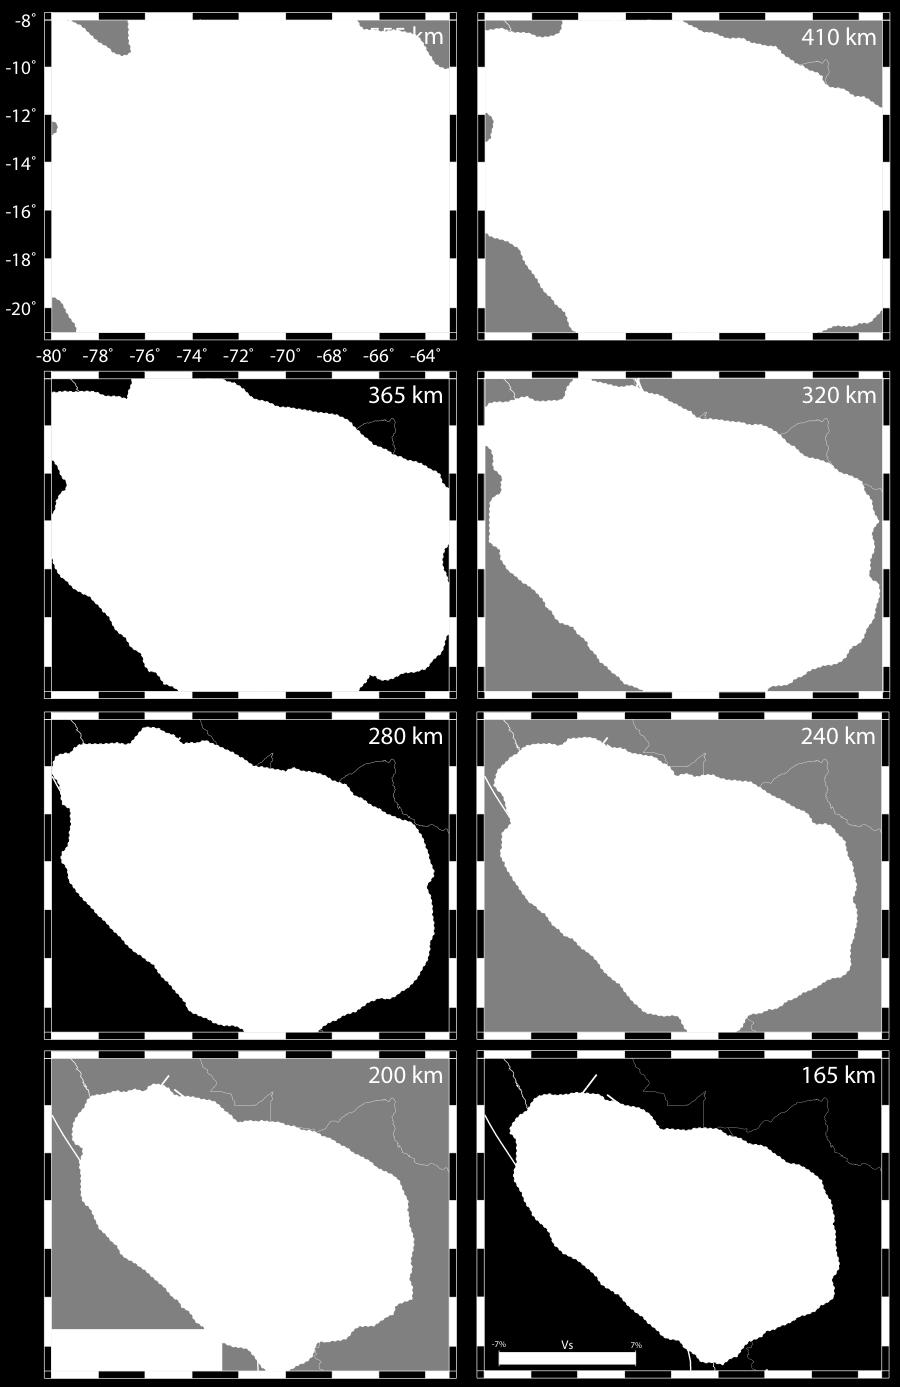 S-wave tomography 2 at different depth